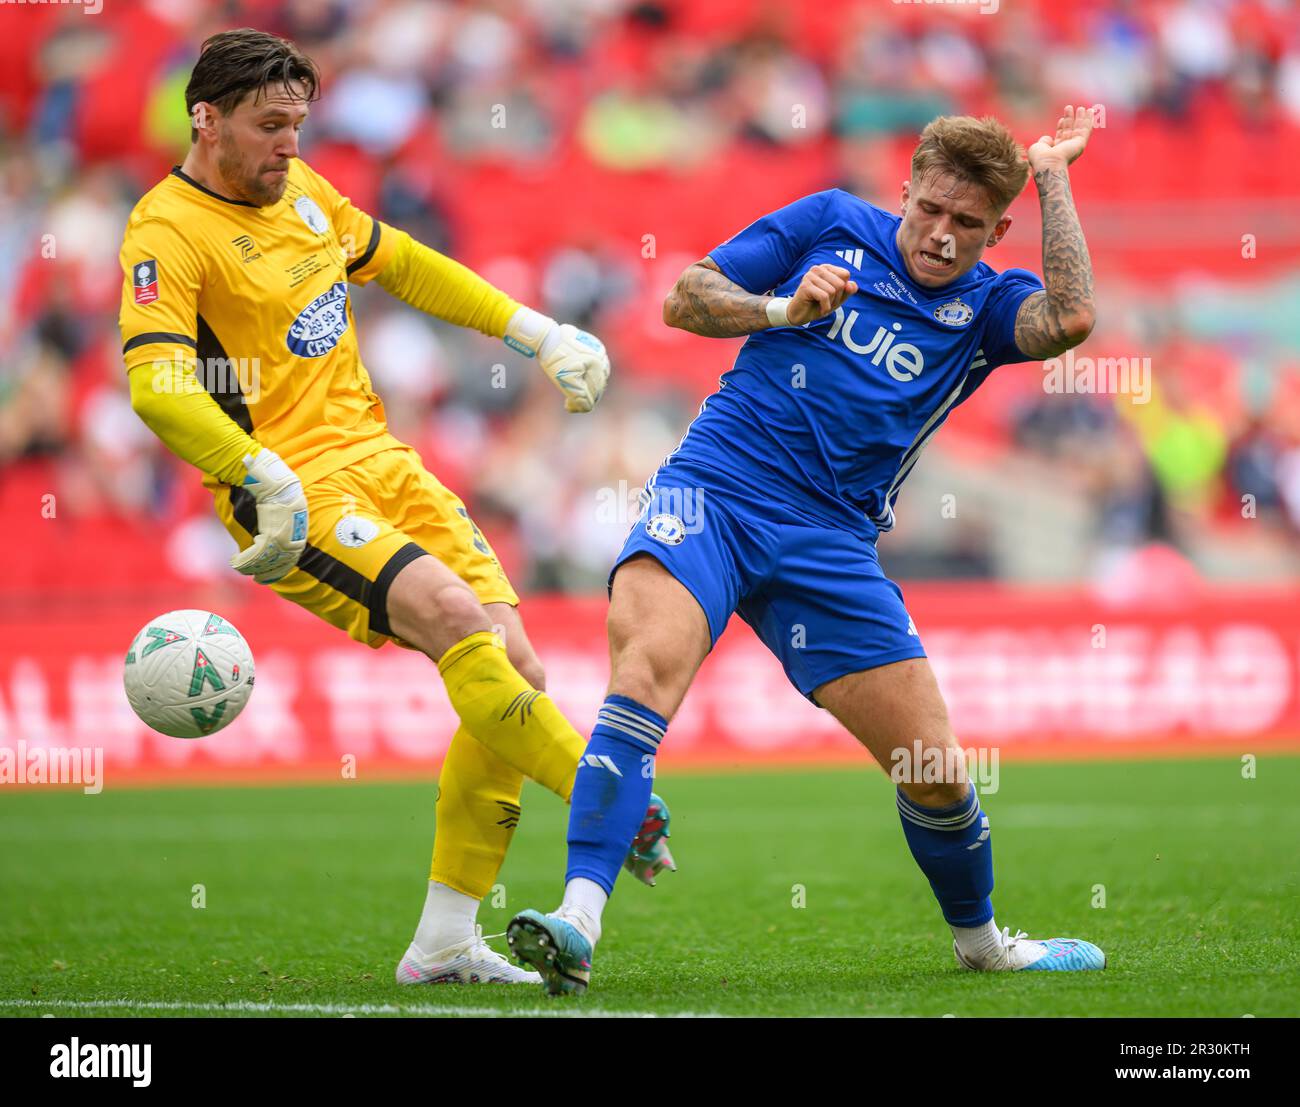 London, UK. 21st May, 2023. 21 May 2023 - Gateshead v FC Halifax Town - FA Trophy Final - Wembley Stadium FC Halifax Town's Jamie Cooke scores the winning goal during the FA Trophy Final at Wembey Stadium. Picture Credit: Mark Pain/Alamy Live News Stock Photo